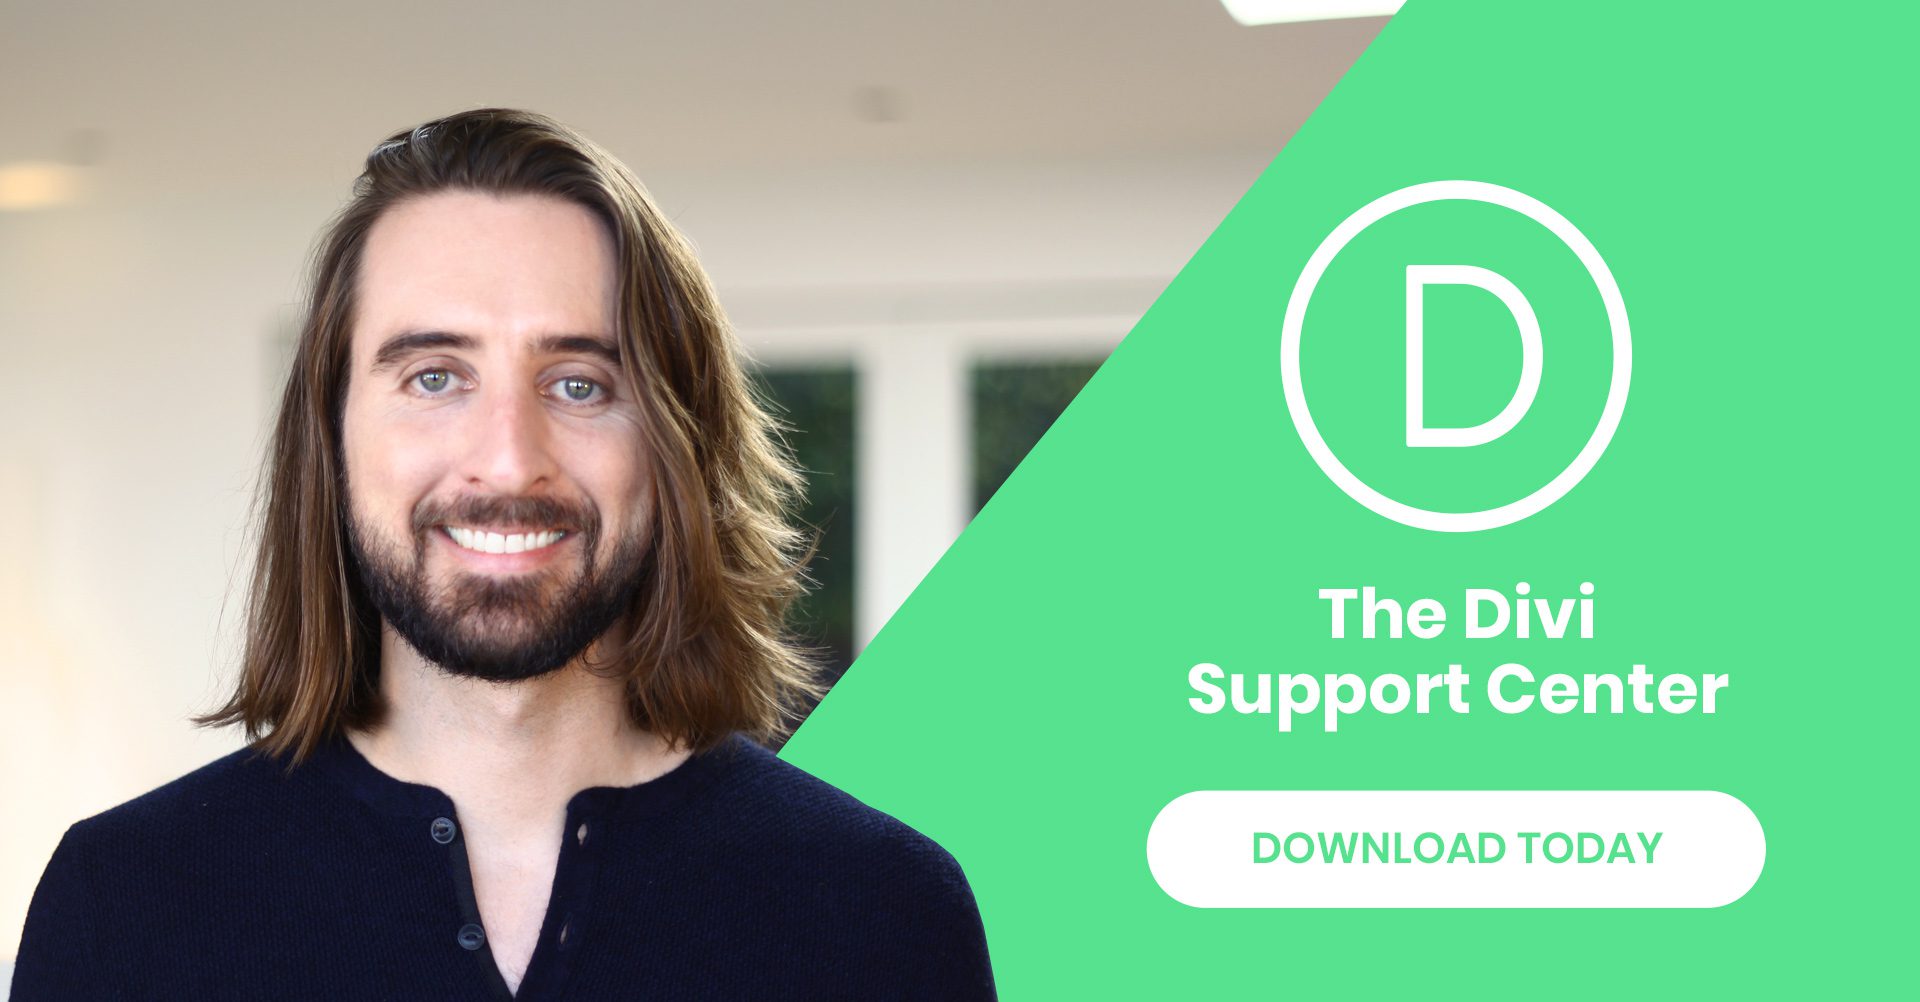 Introducing The Divi Support Center! Including Safe Mode, System Status And Remote Access